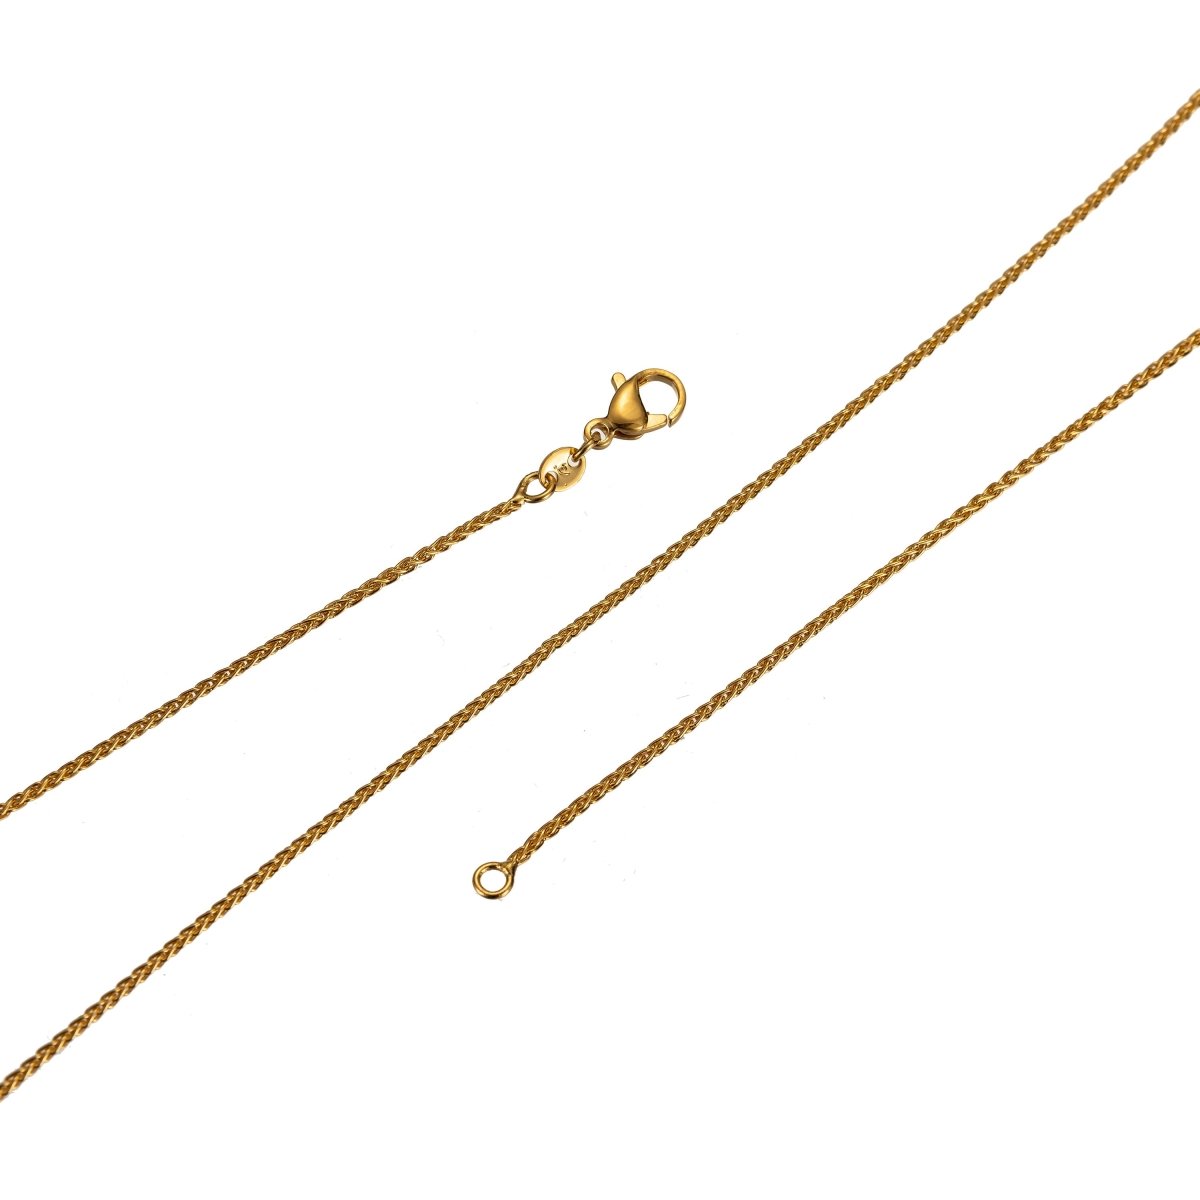 24K Gold Filled 1mm 18 19.5 Inch Wheat Chain Necklace with spring ring clasp ready to wear chain Finished chain for necklace supply | CN-432 CN-479 Clearance Pricing - DLUXCA